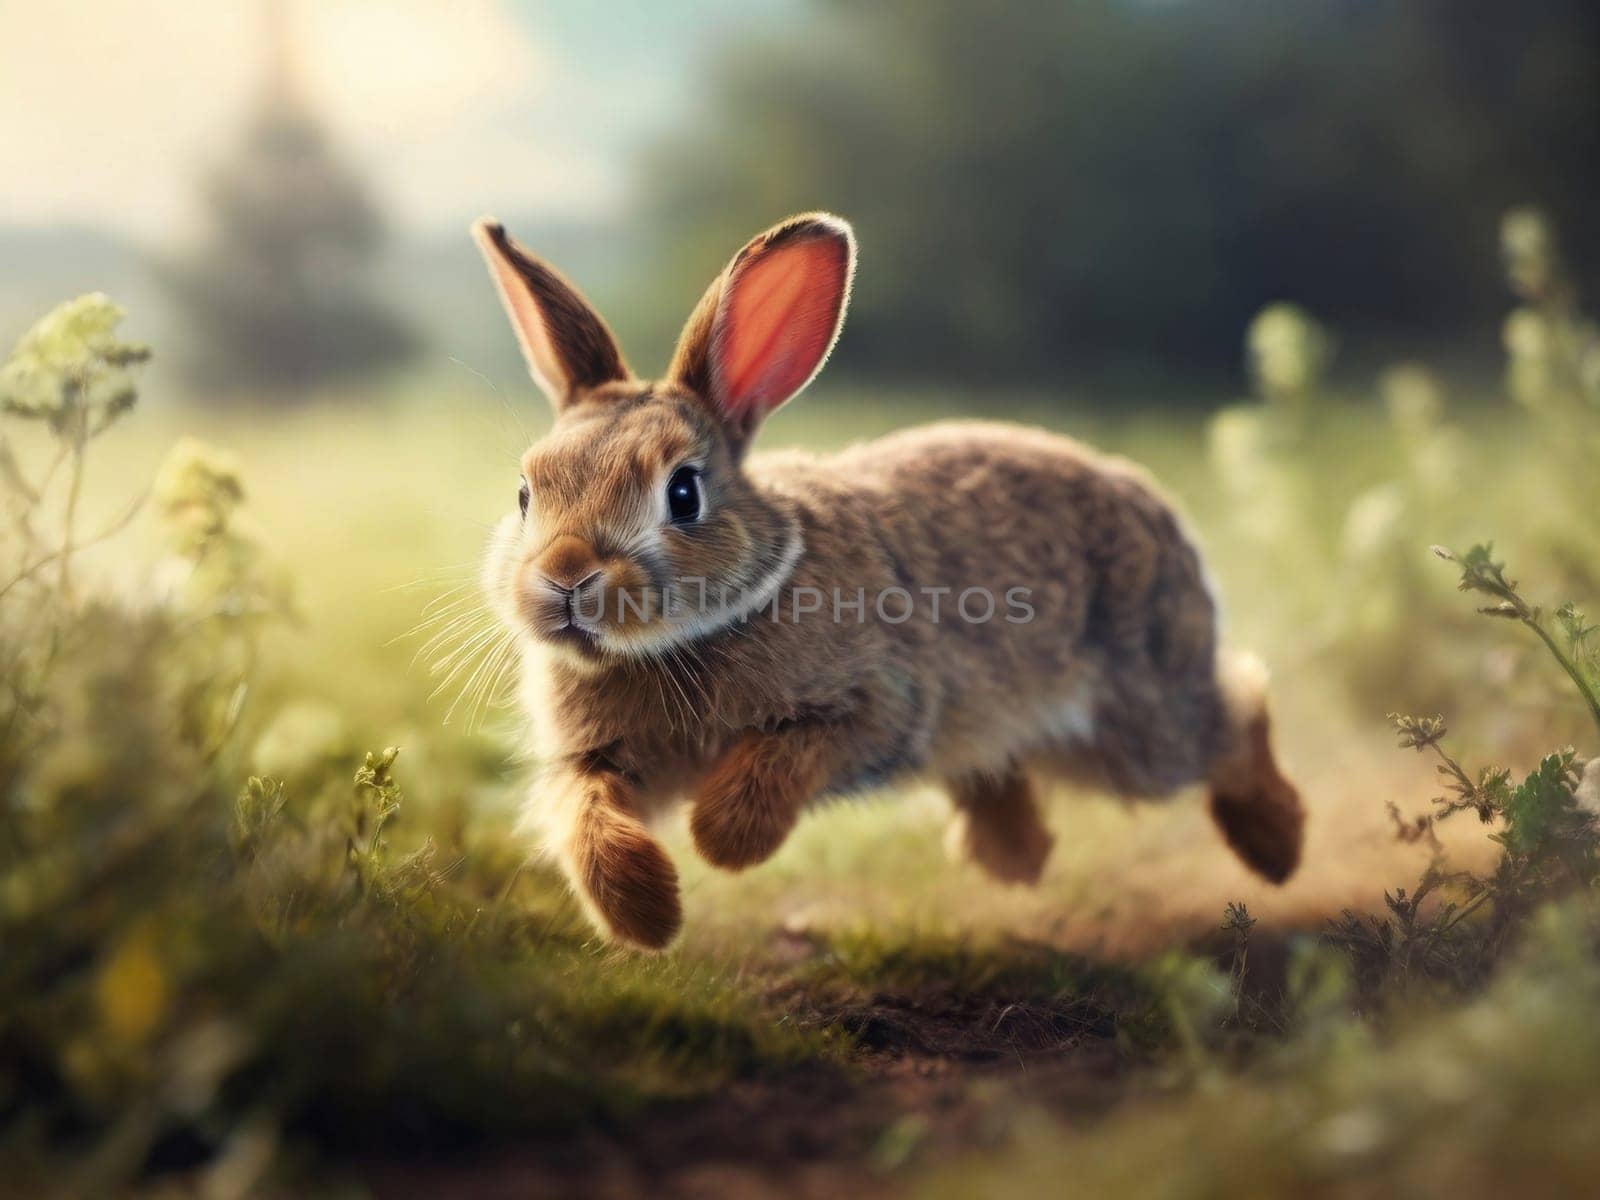 The brown hare is running. Wild brown hare in the field. The brown hare escapes from danger